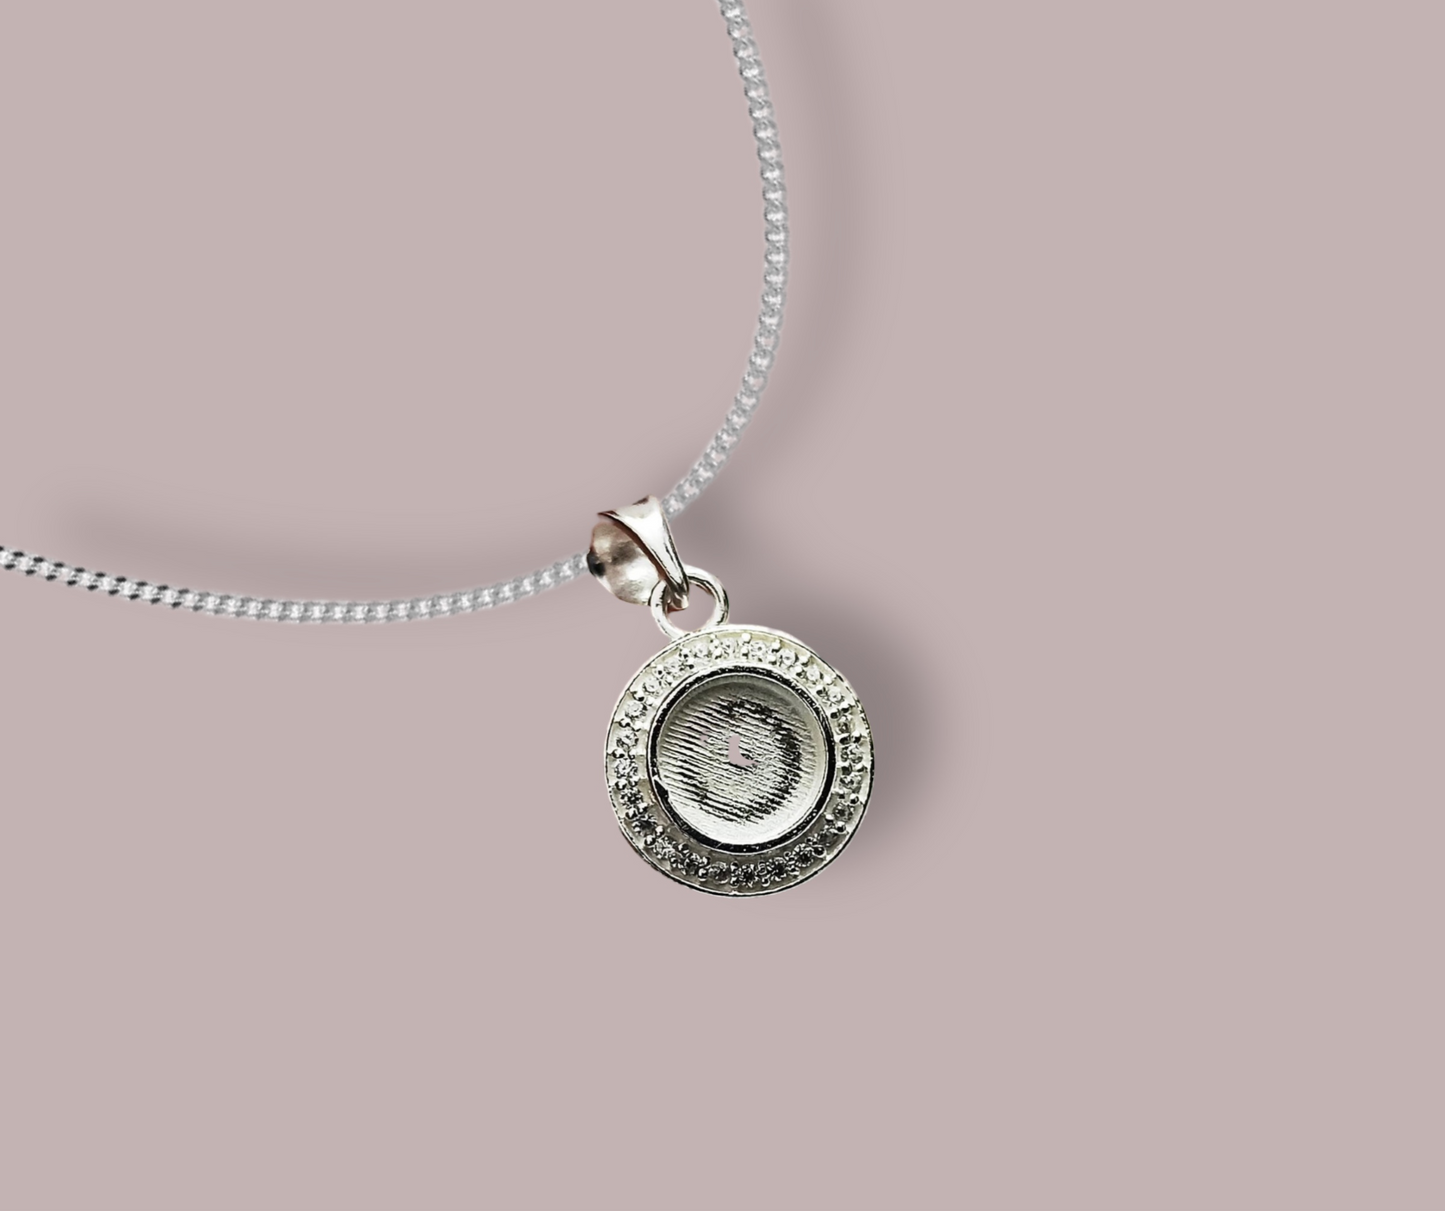 The Charming circle necklace